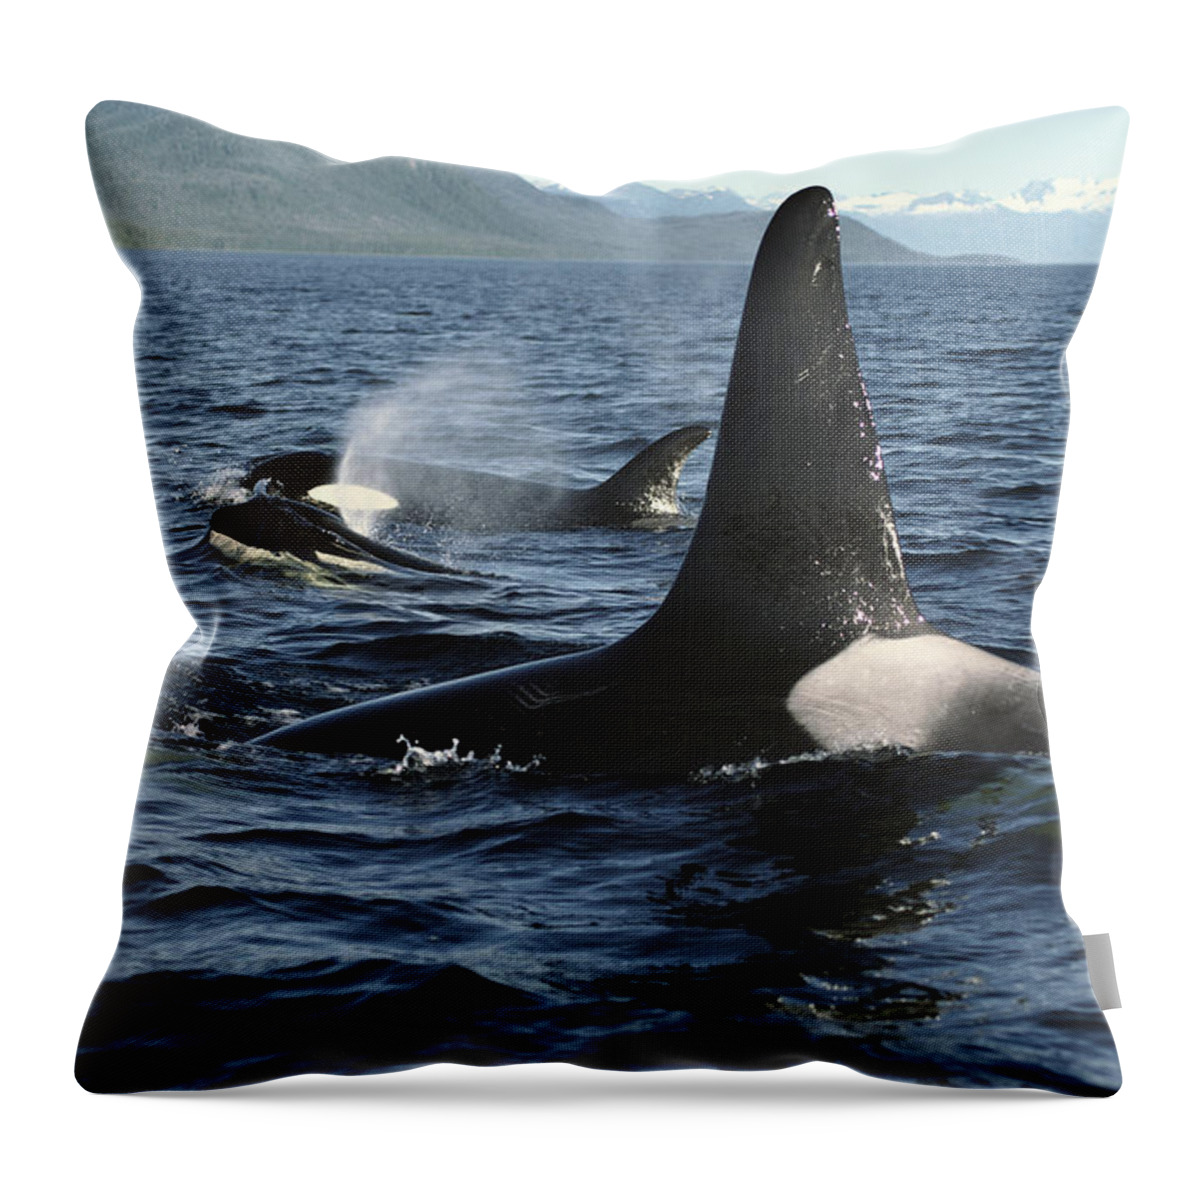 00079588 Throw Pillow featuring the photograph Orca Pod Surfacing Johnstone Strait by Flip Nicklin